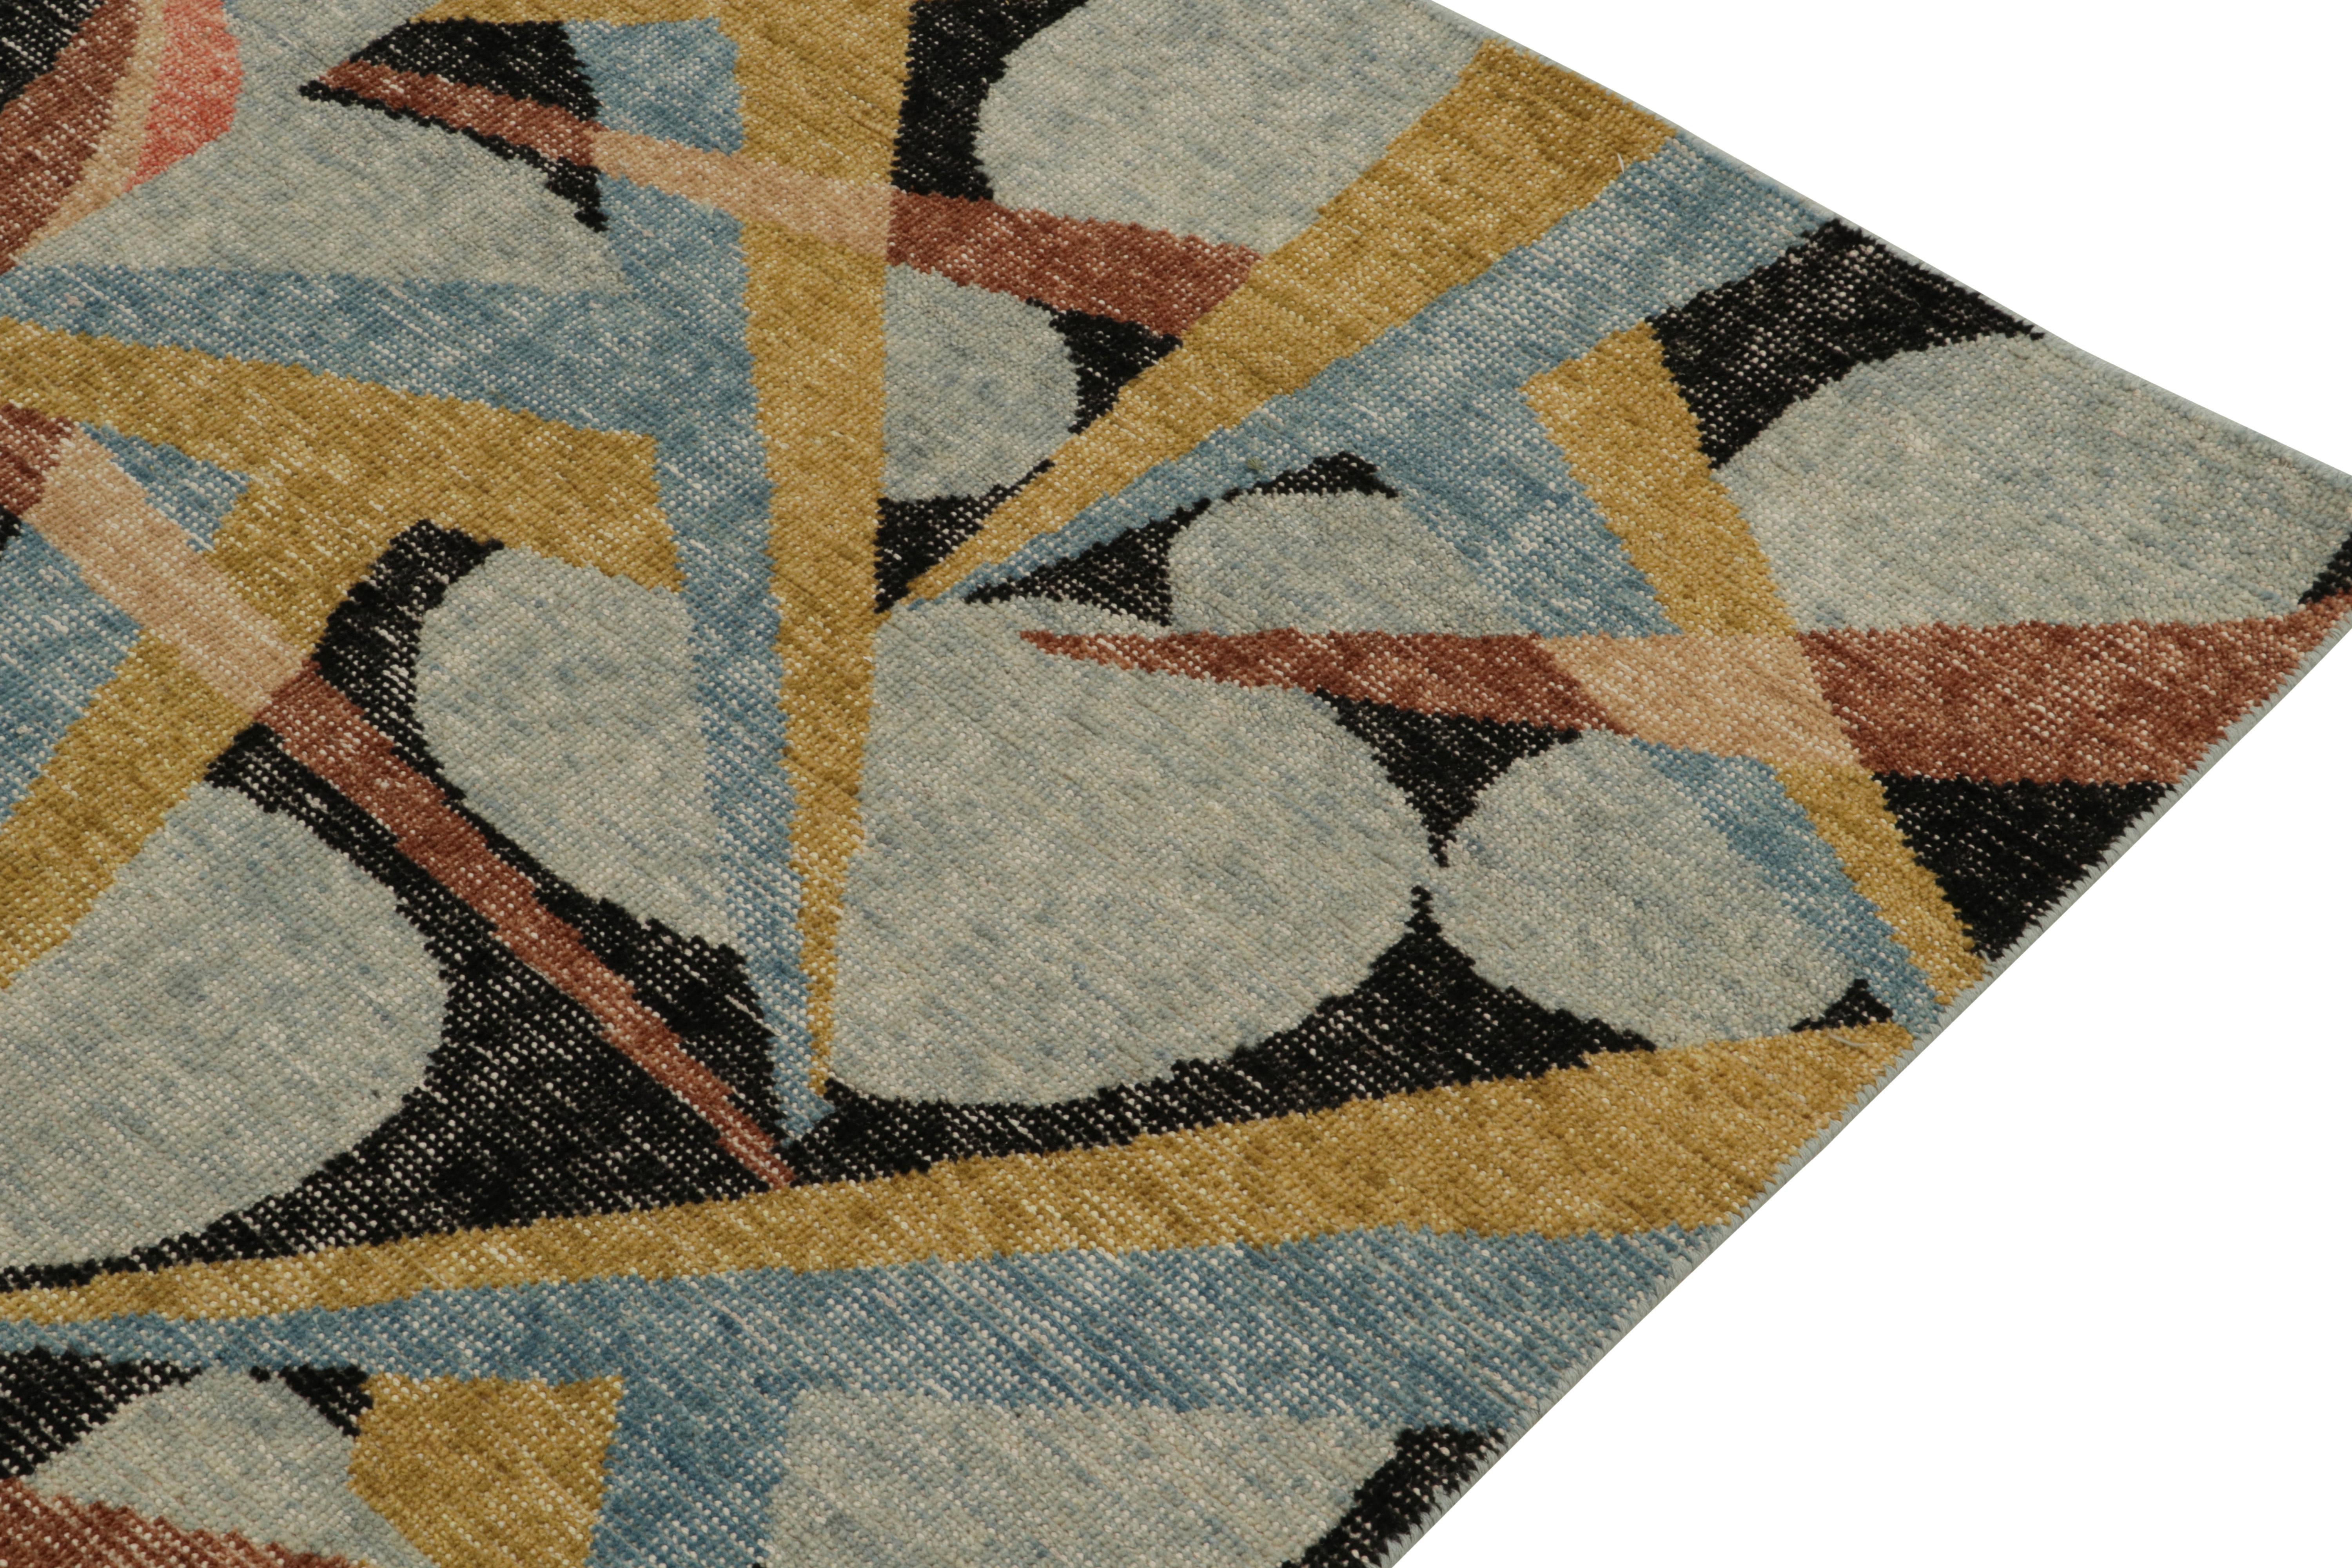 Hand-Knotted Rug & Kilim’s Distressed Deco Style Rug in Blue & Beige-Brown Geometric Patterns For Sale